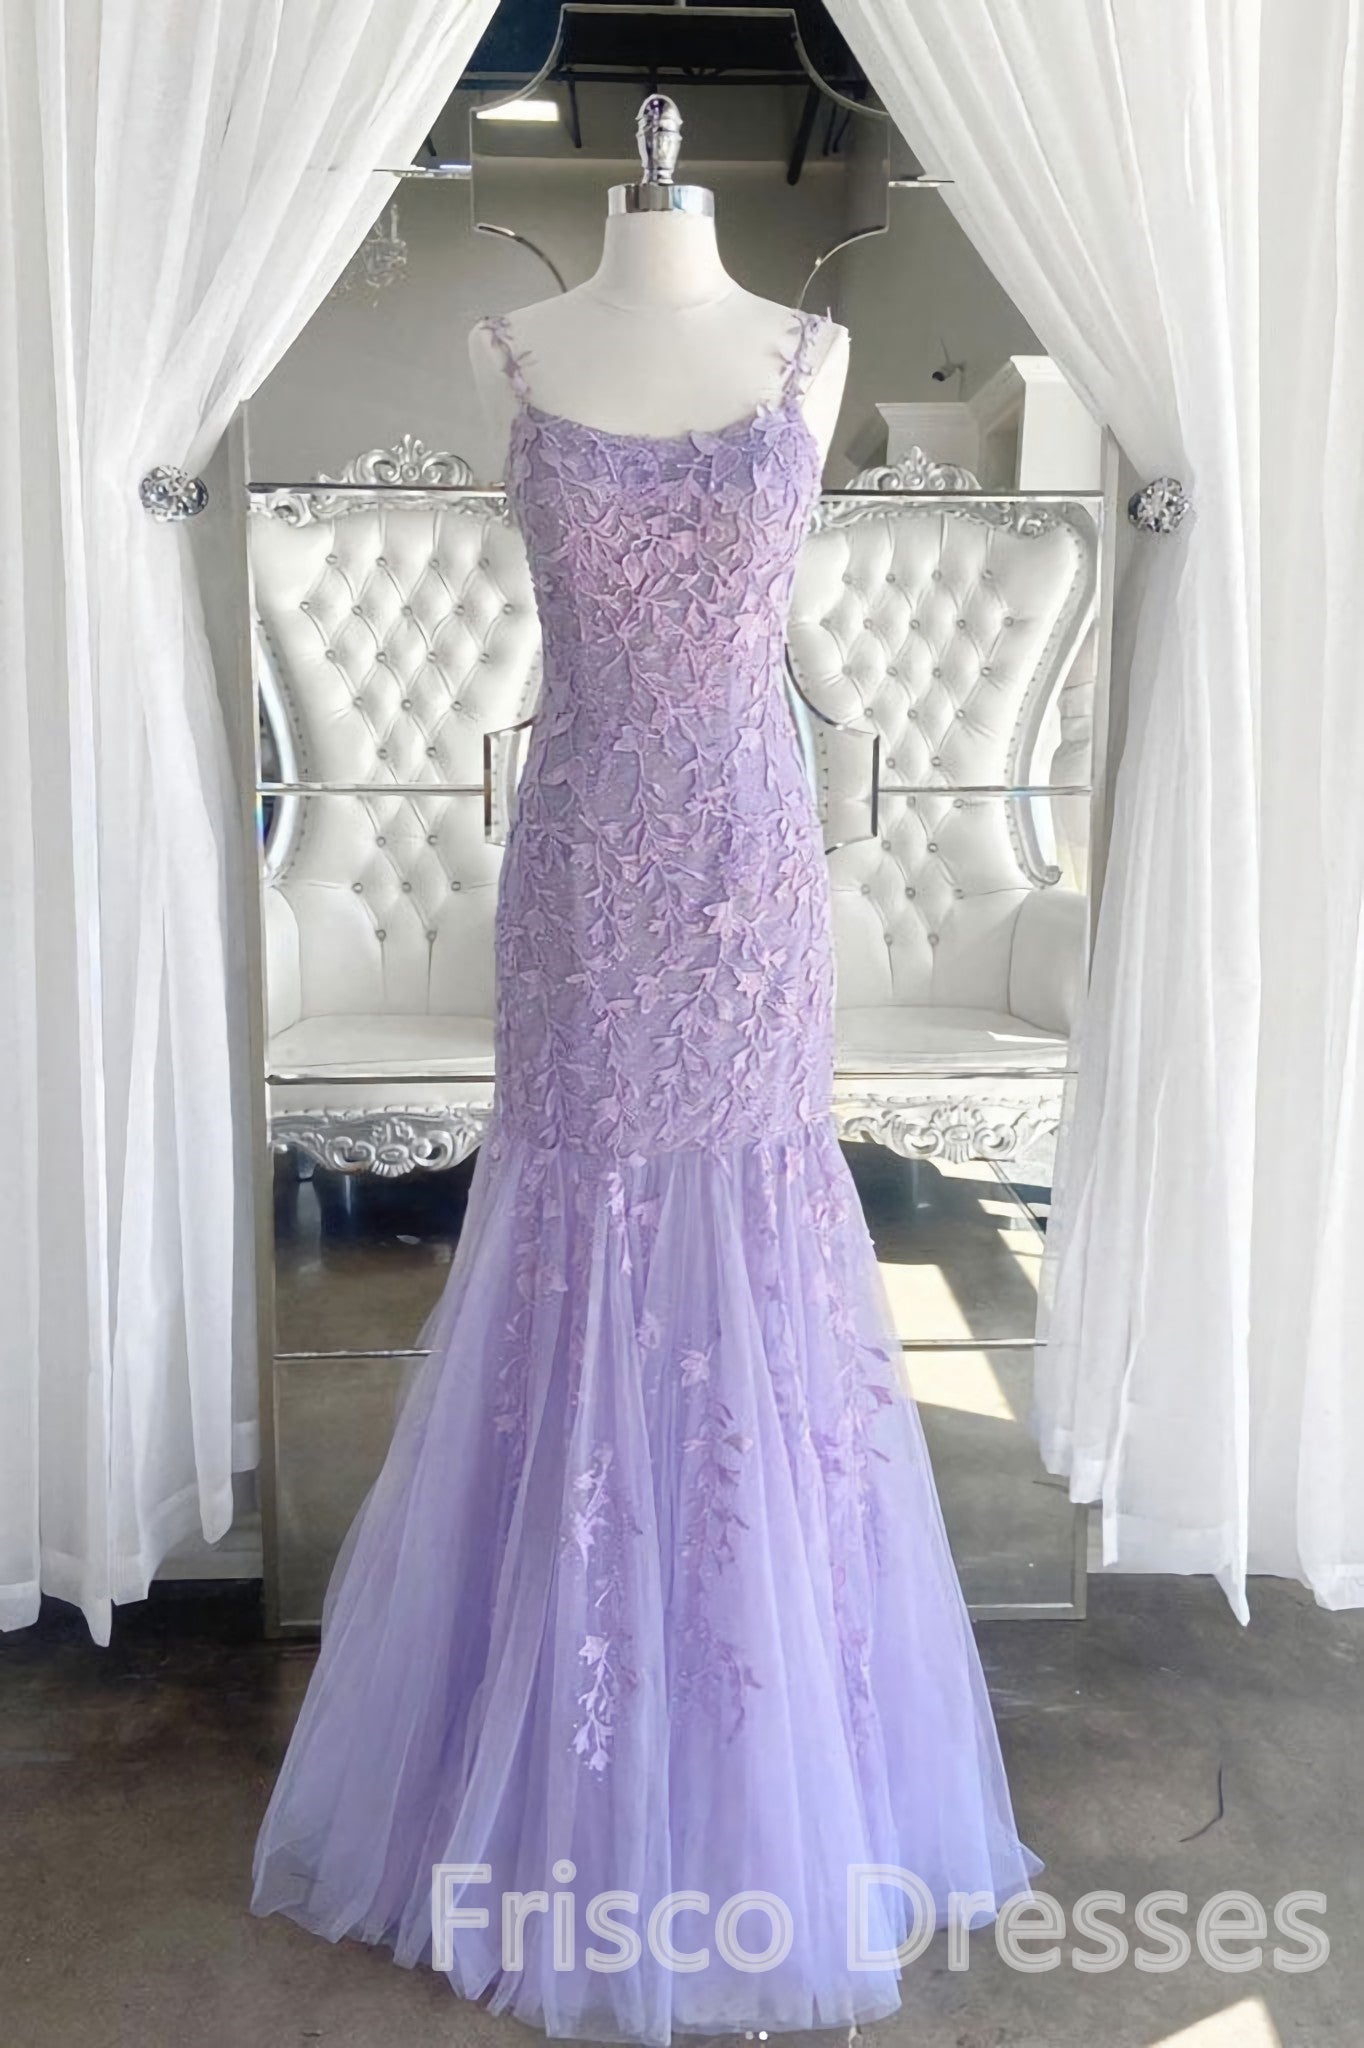 Lilac Spaghetti Straps Long Lace Tulle Evening Dresses Mermaid Appliques Corset Prom Dresses outfit, Party Dress Online